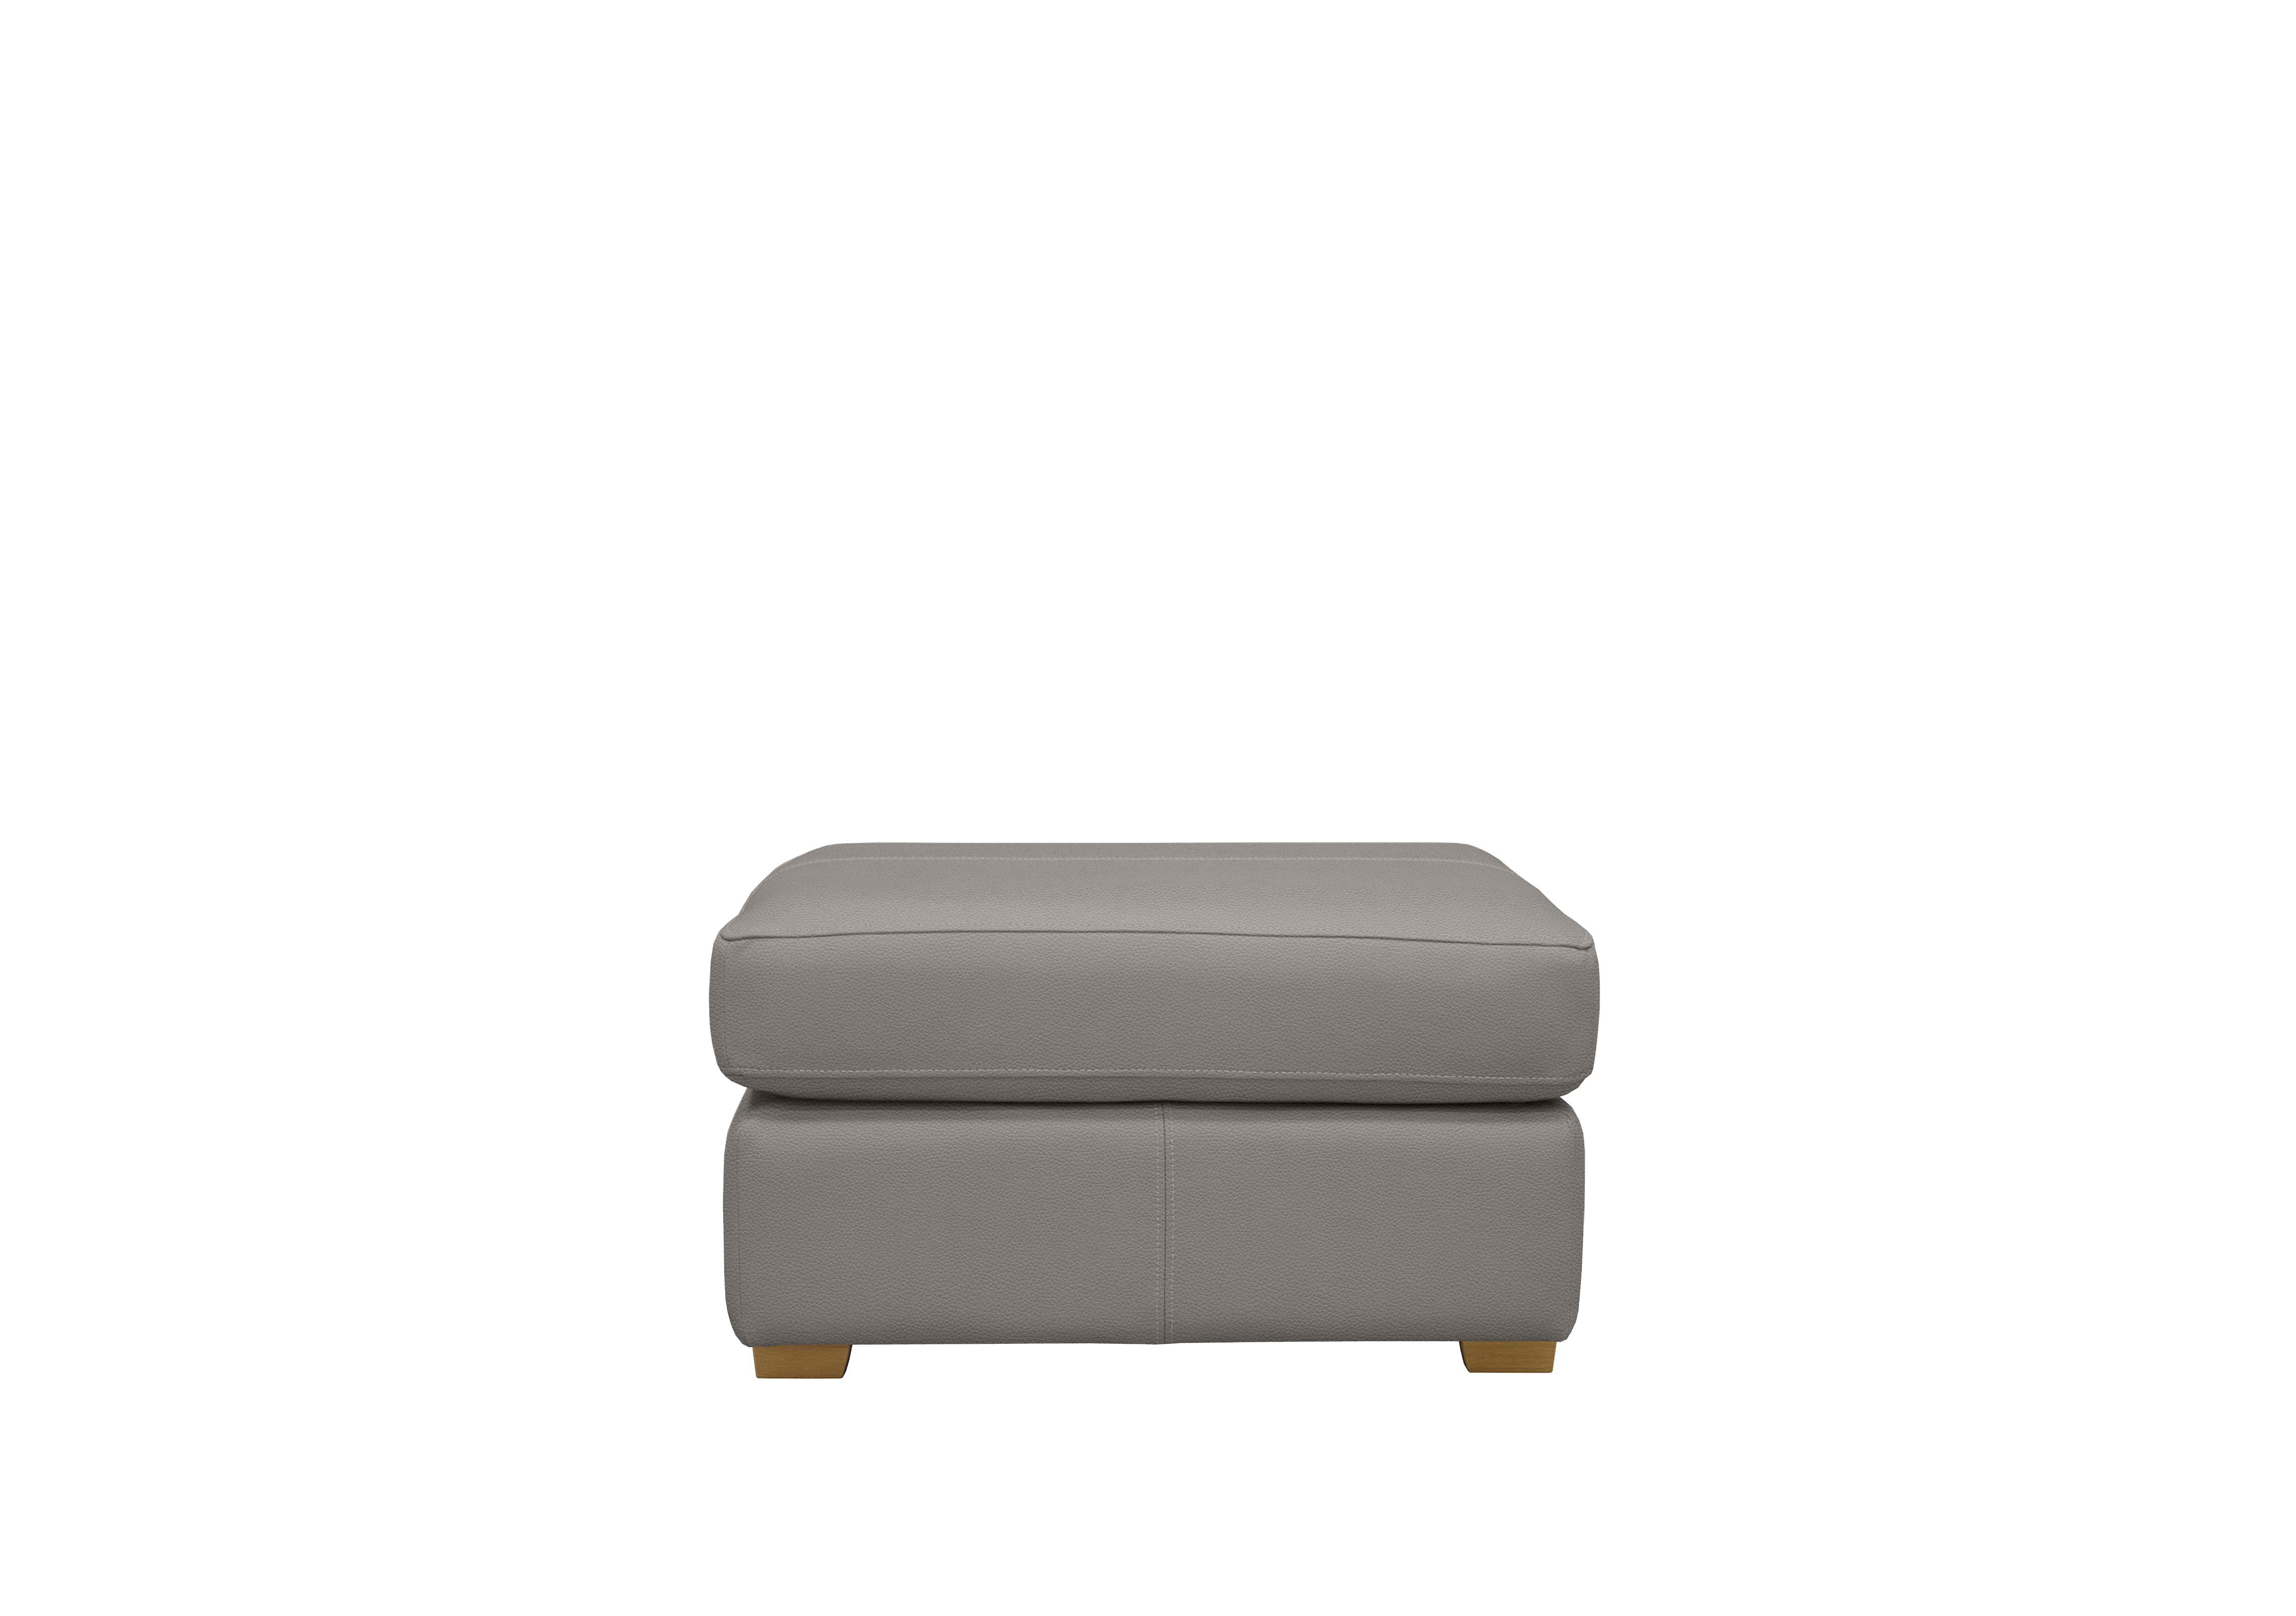 Seattle Leather Footstool with Wooden Feet in L842 Cambridge Grey Ok on Furniture Village